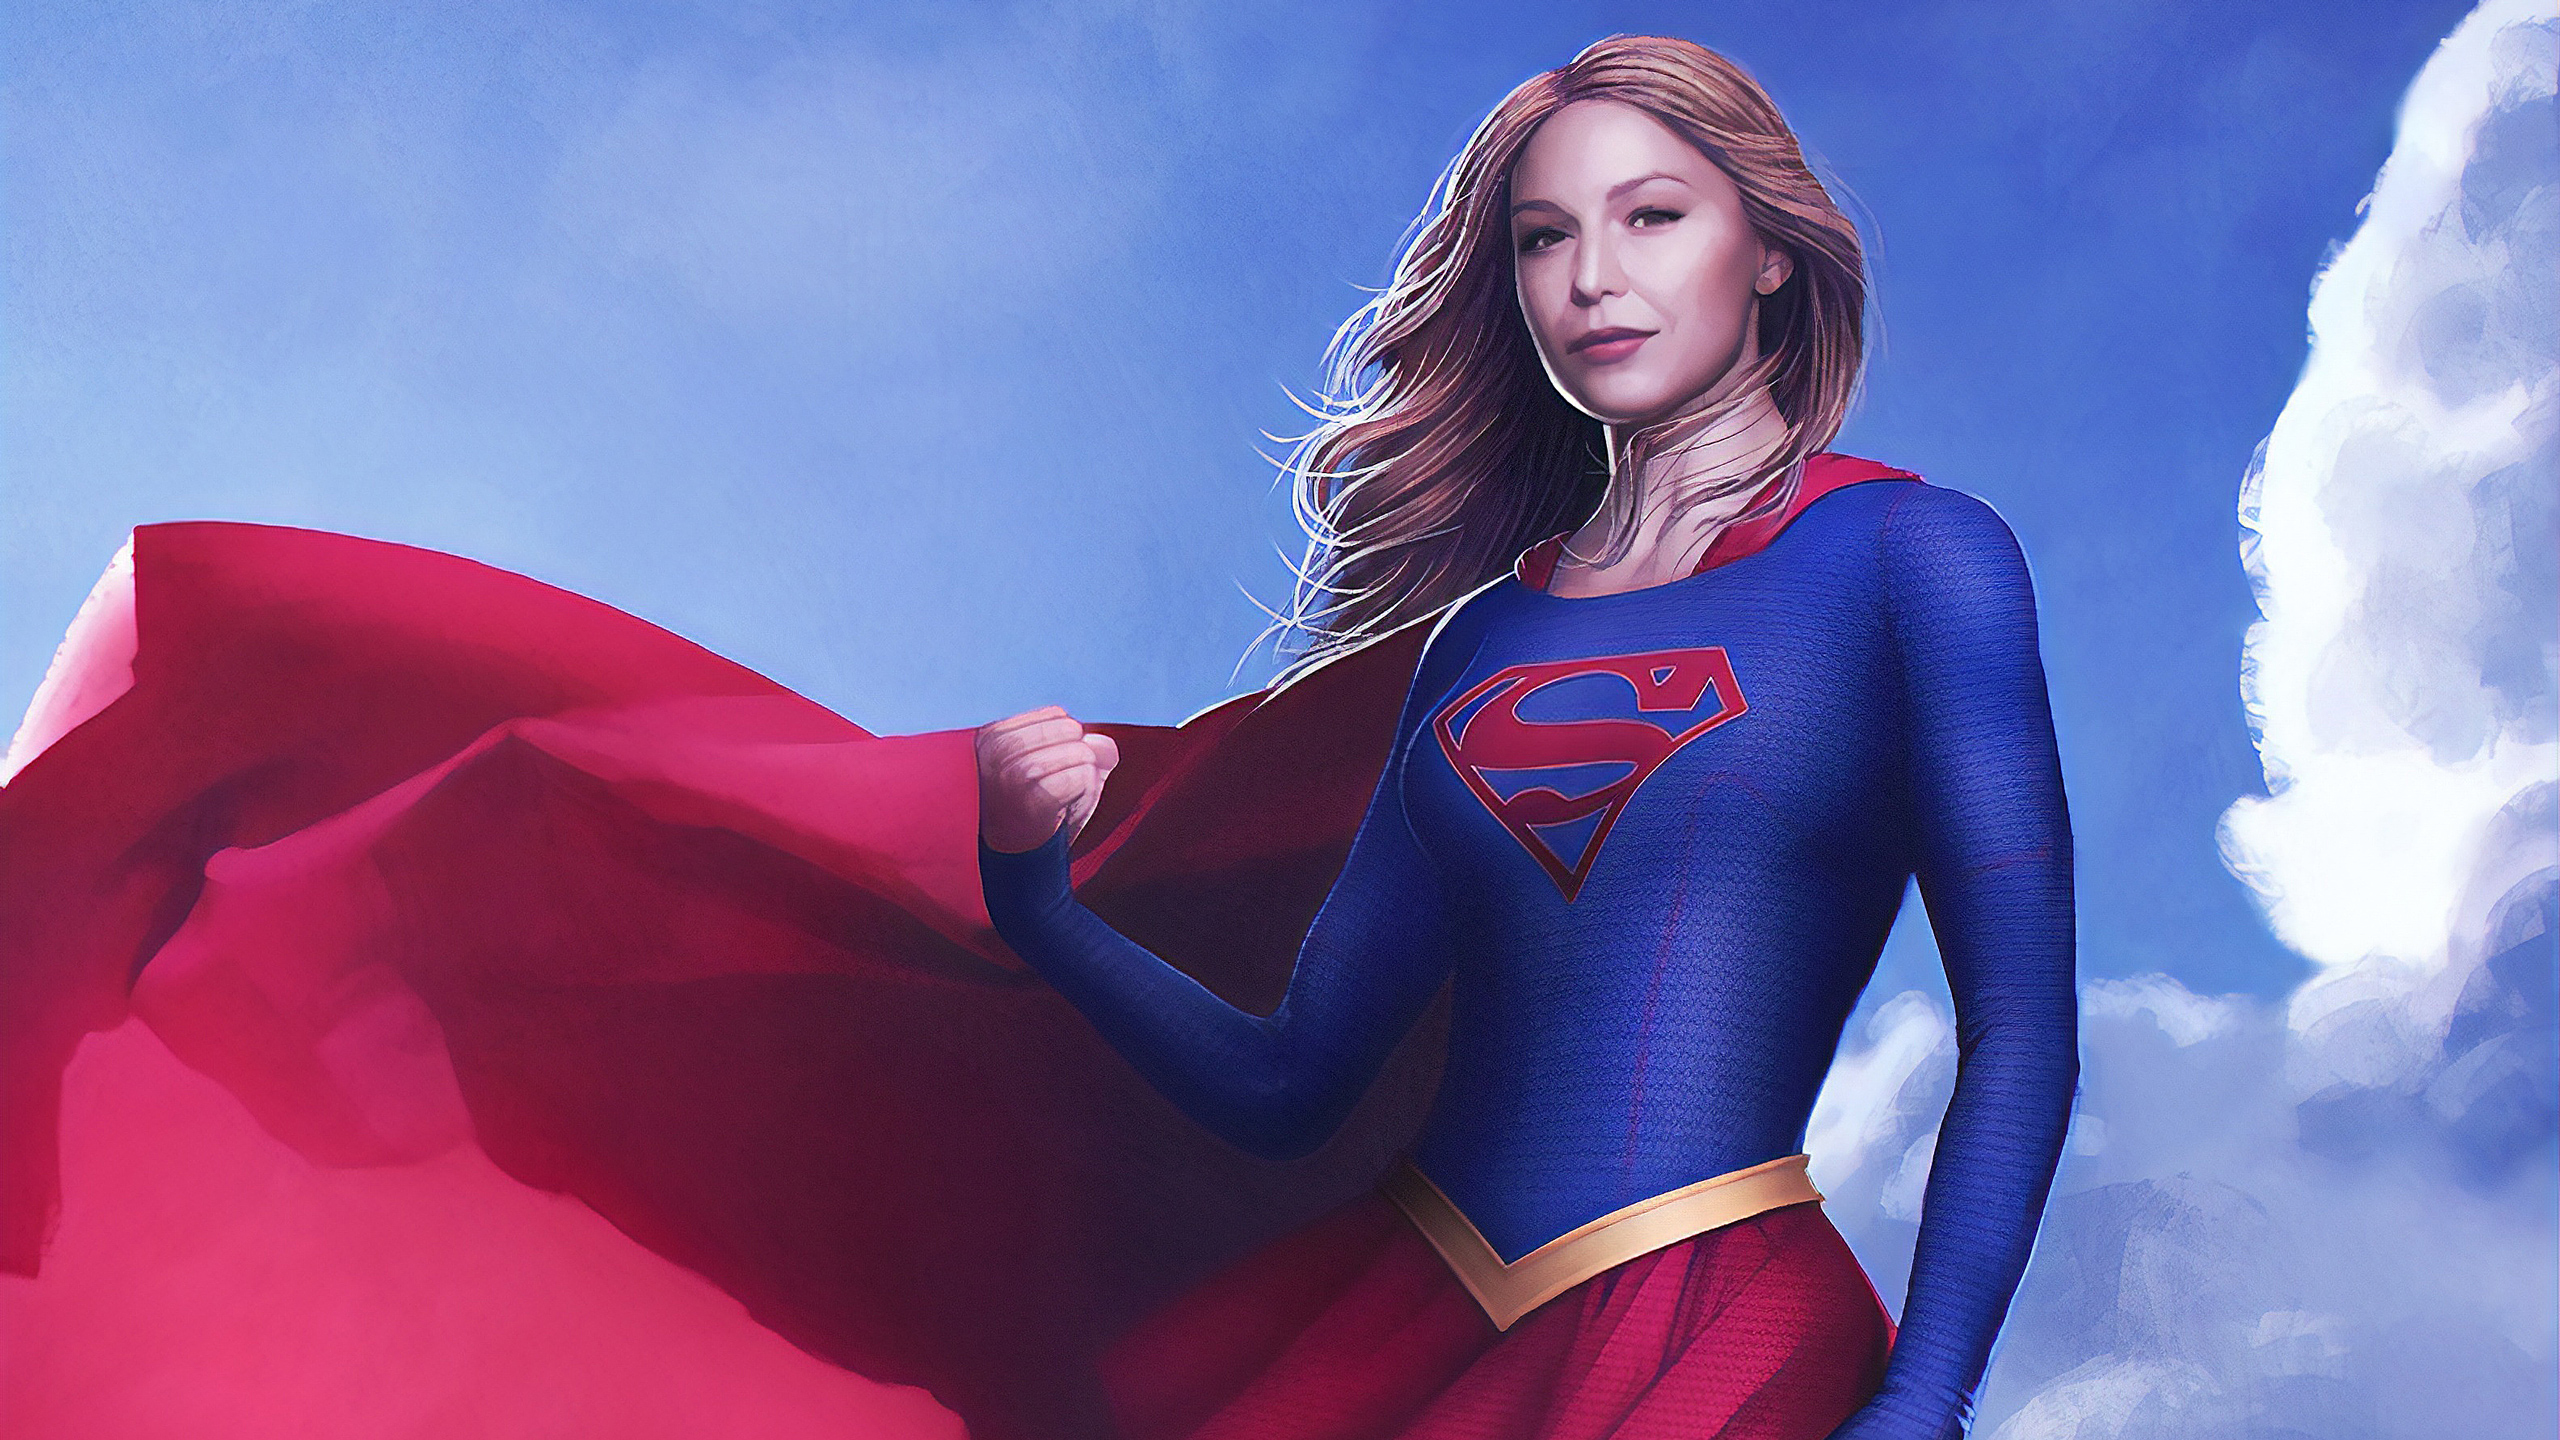 Supergirl Flying Art, HD Superheroes, 4k Wallpapers, Images, Backgrounds,  Photos and Pictures